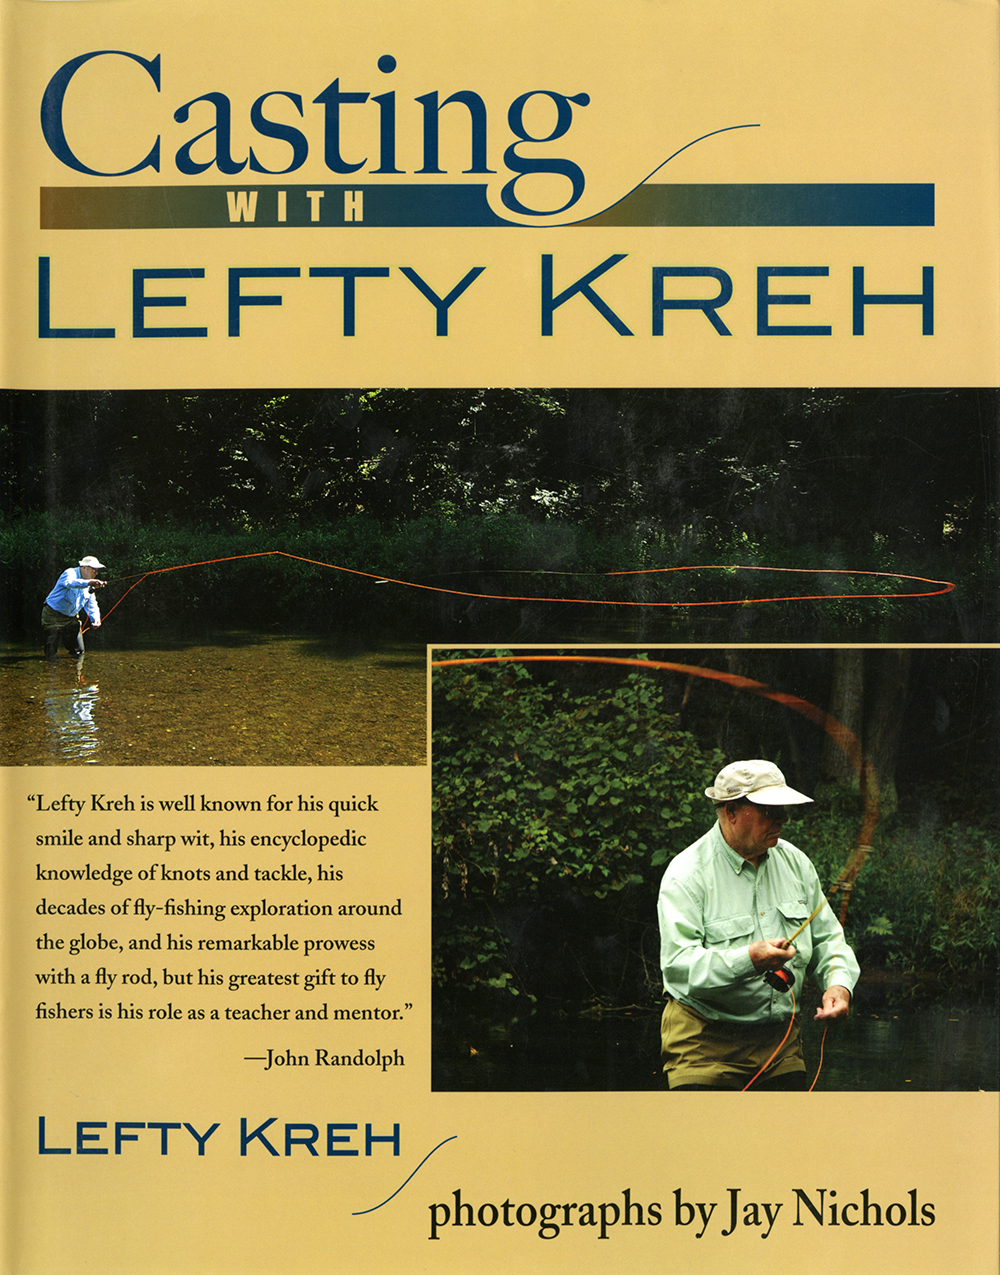 Casting with Lefty Kreh - American Museum Of Fly Fishing